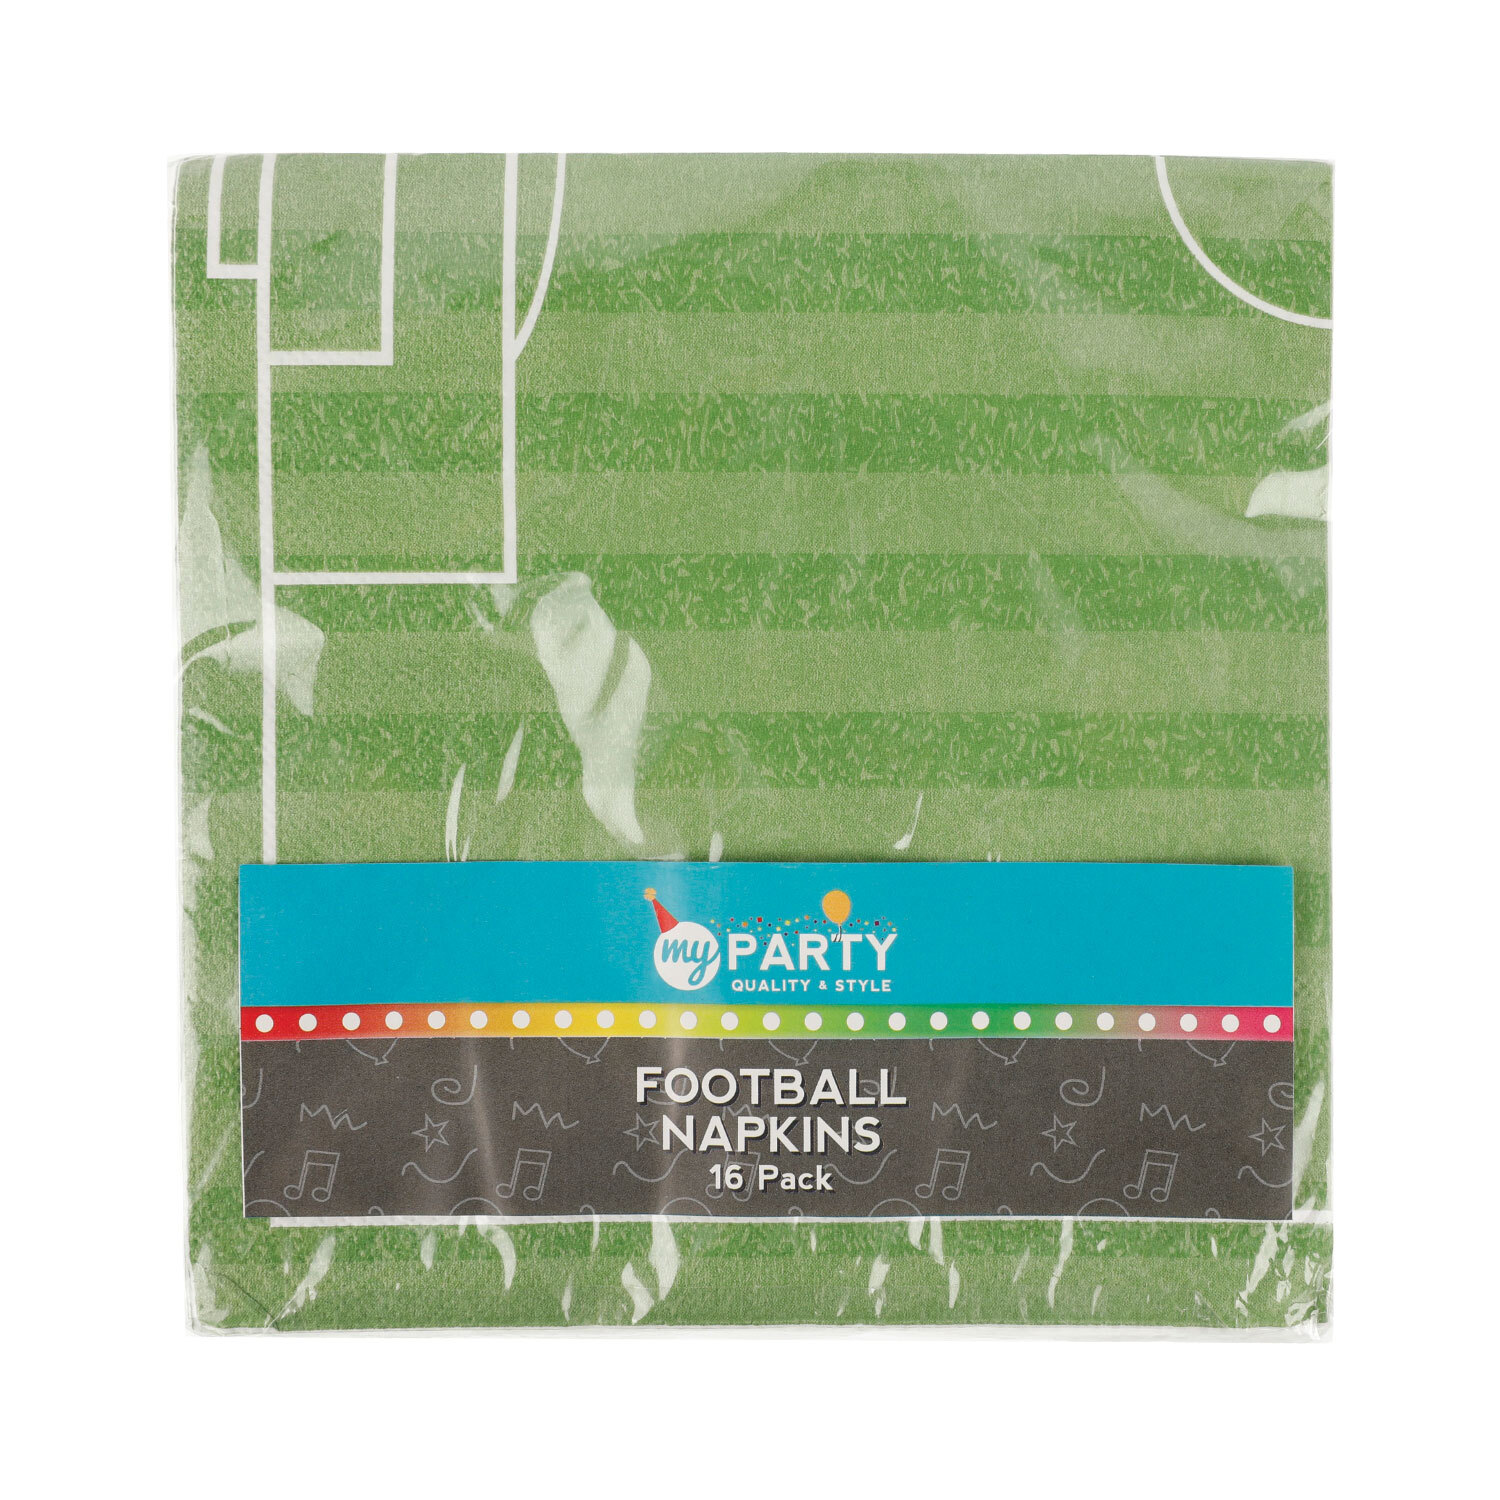 My Party Football Napkins 16 Pack Image